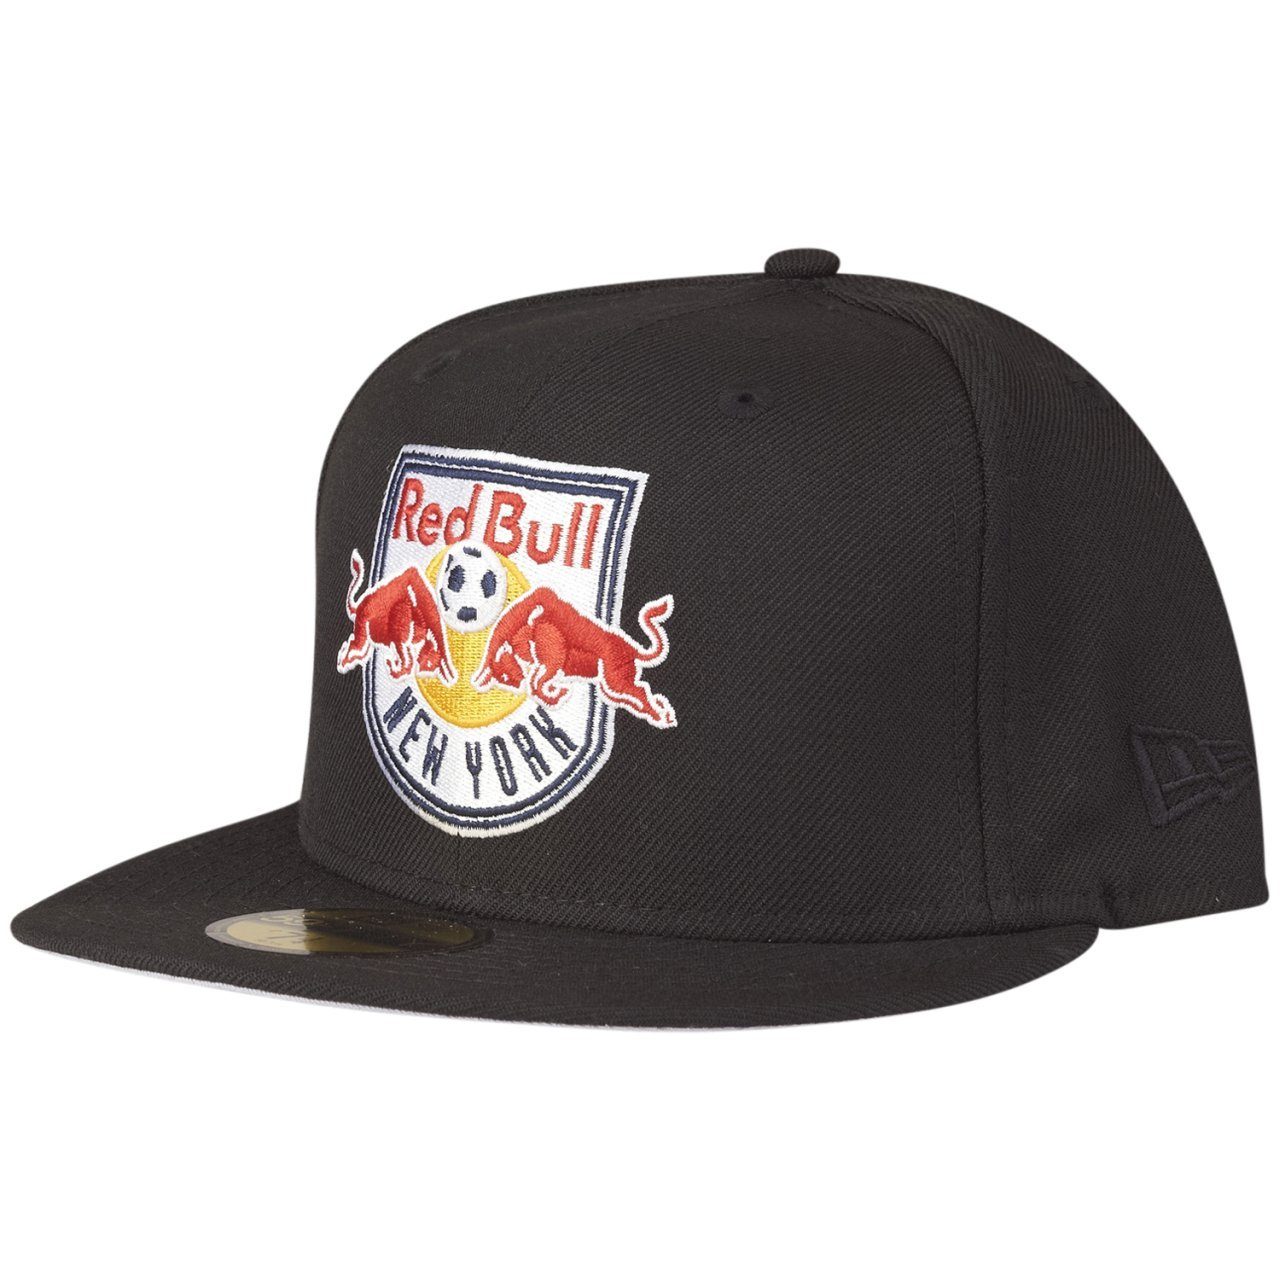 Fitted MLS Red New Bulls York Era New 59Fifty Cap